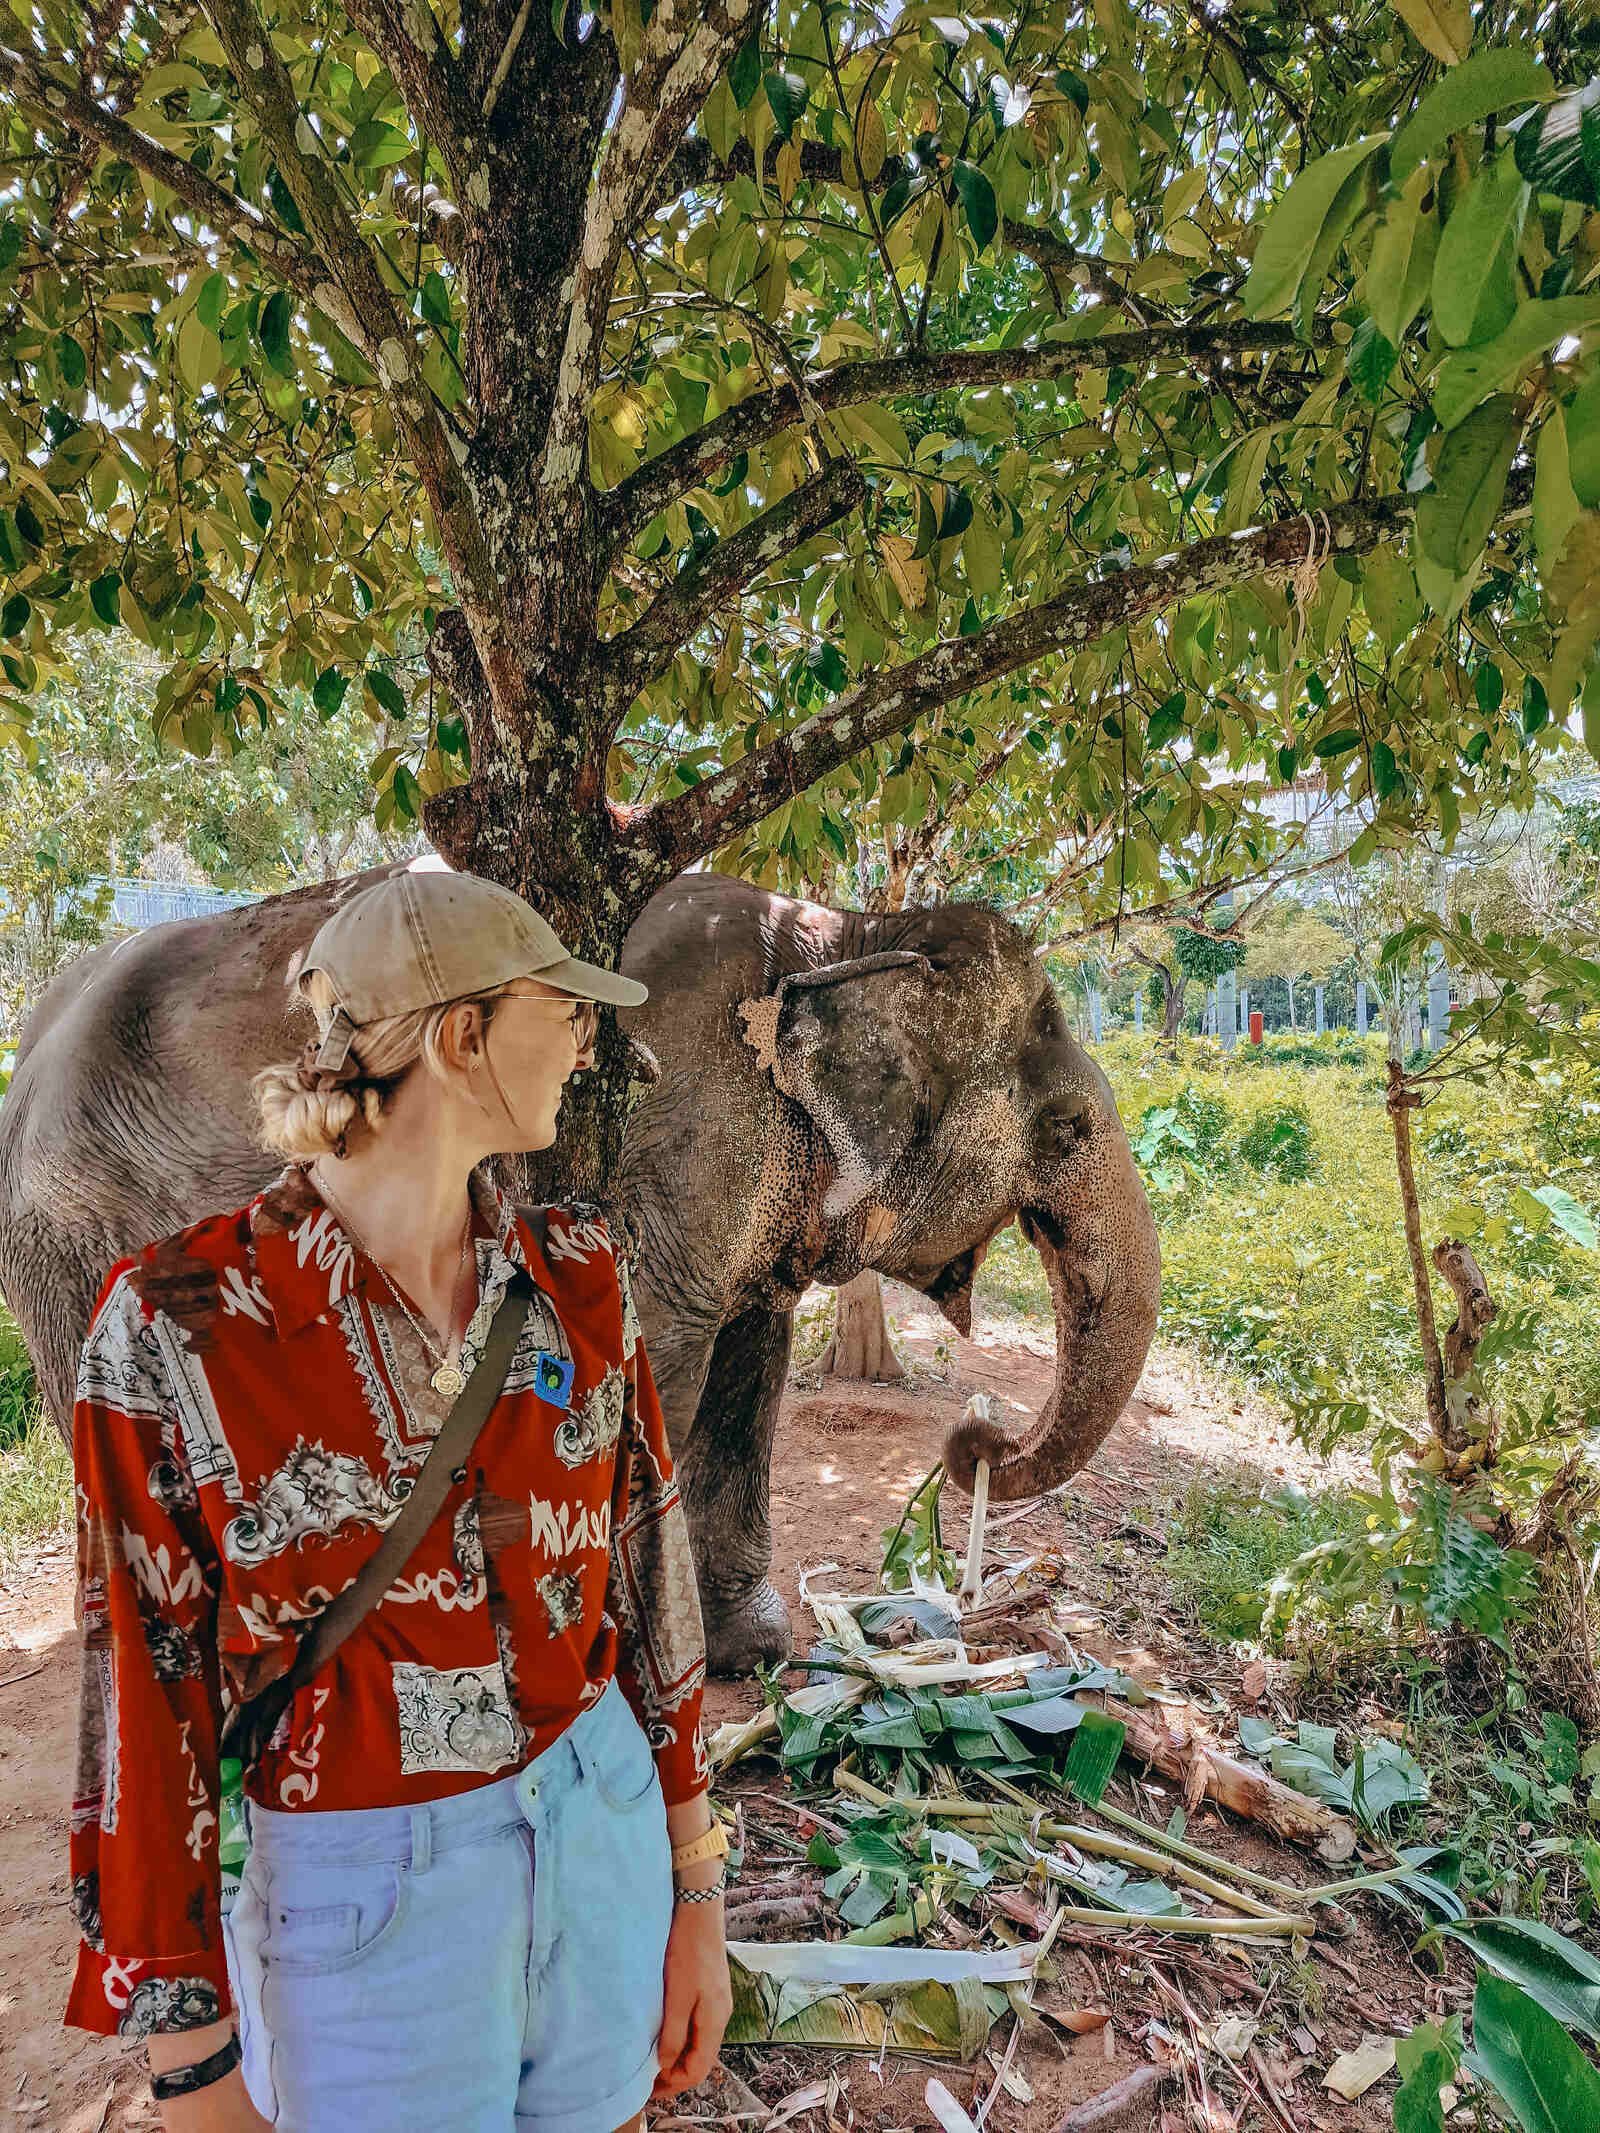 A girl standing with an Elephant in the background